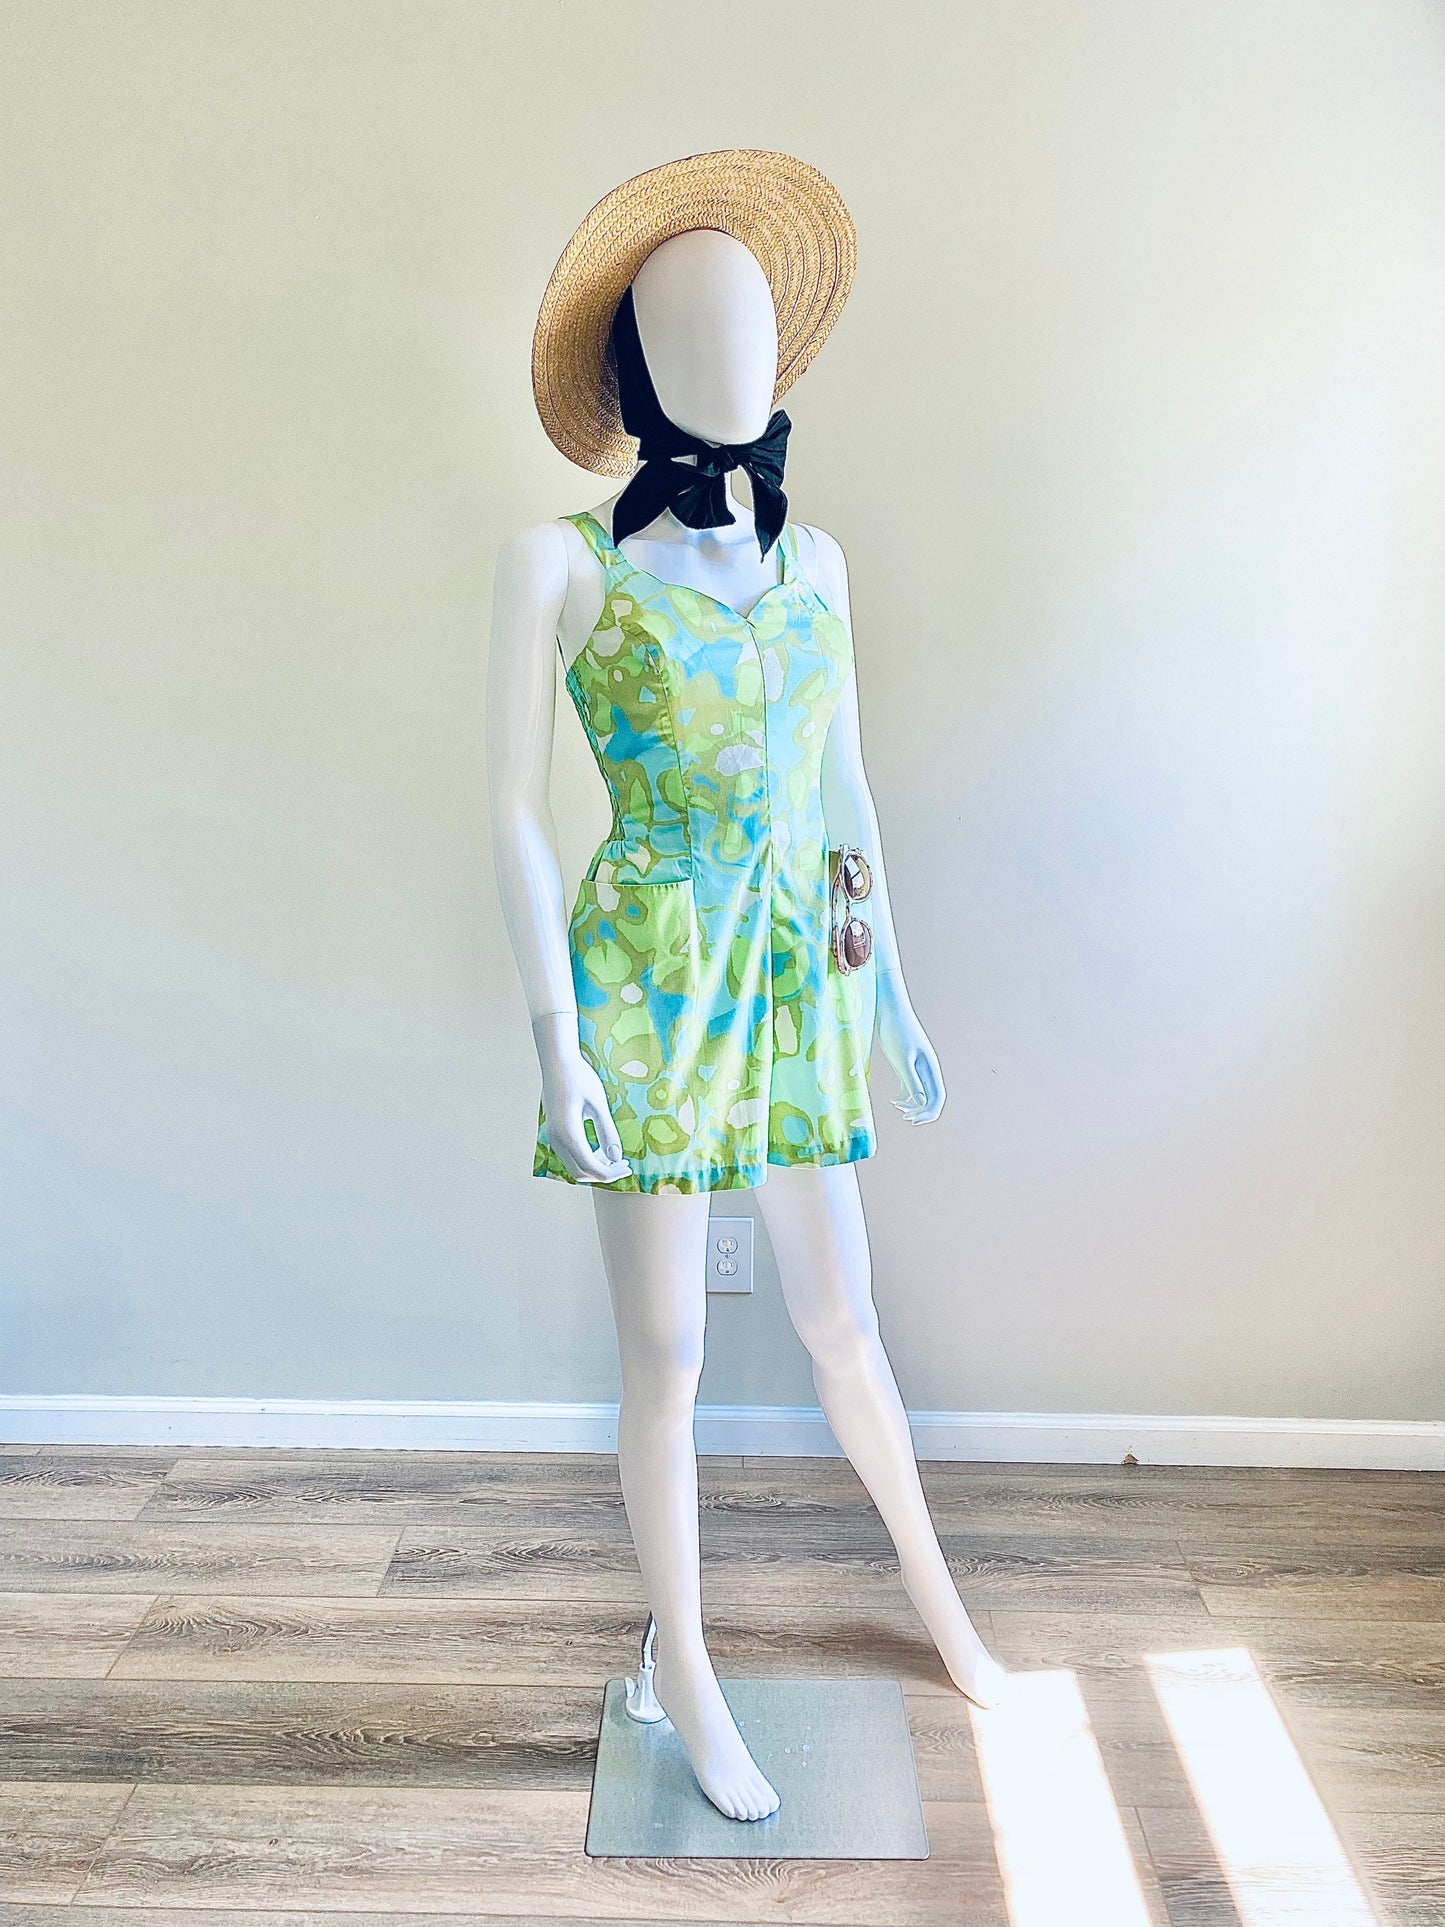 Vintage 1950s Abstract Print Playsuit / 50s romper Size S